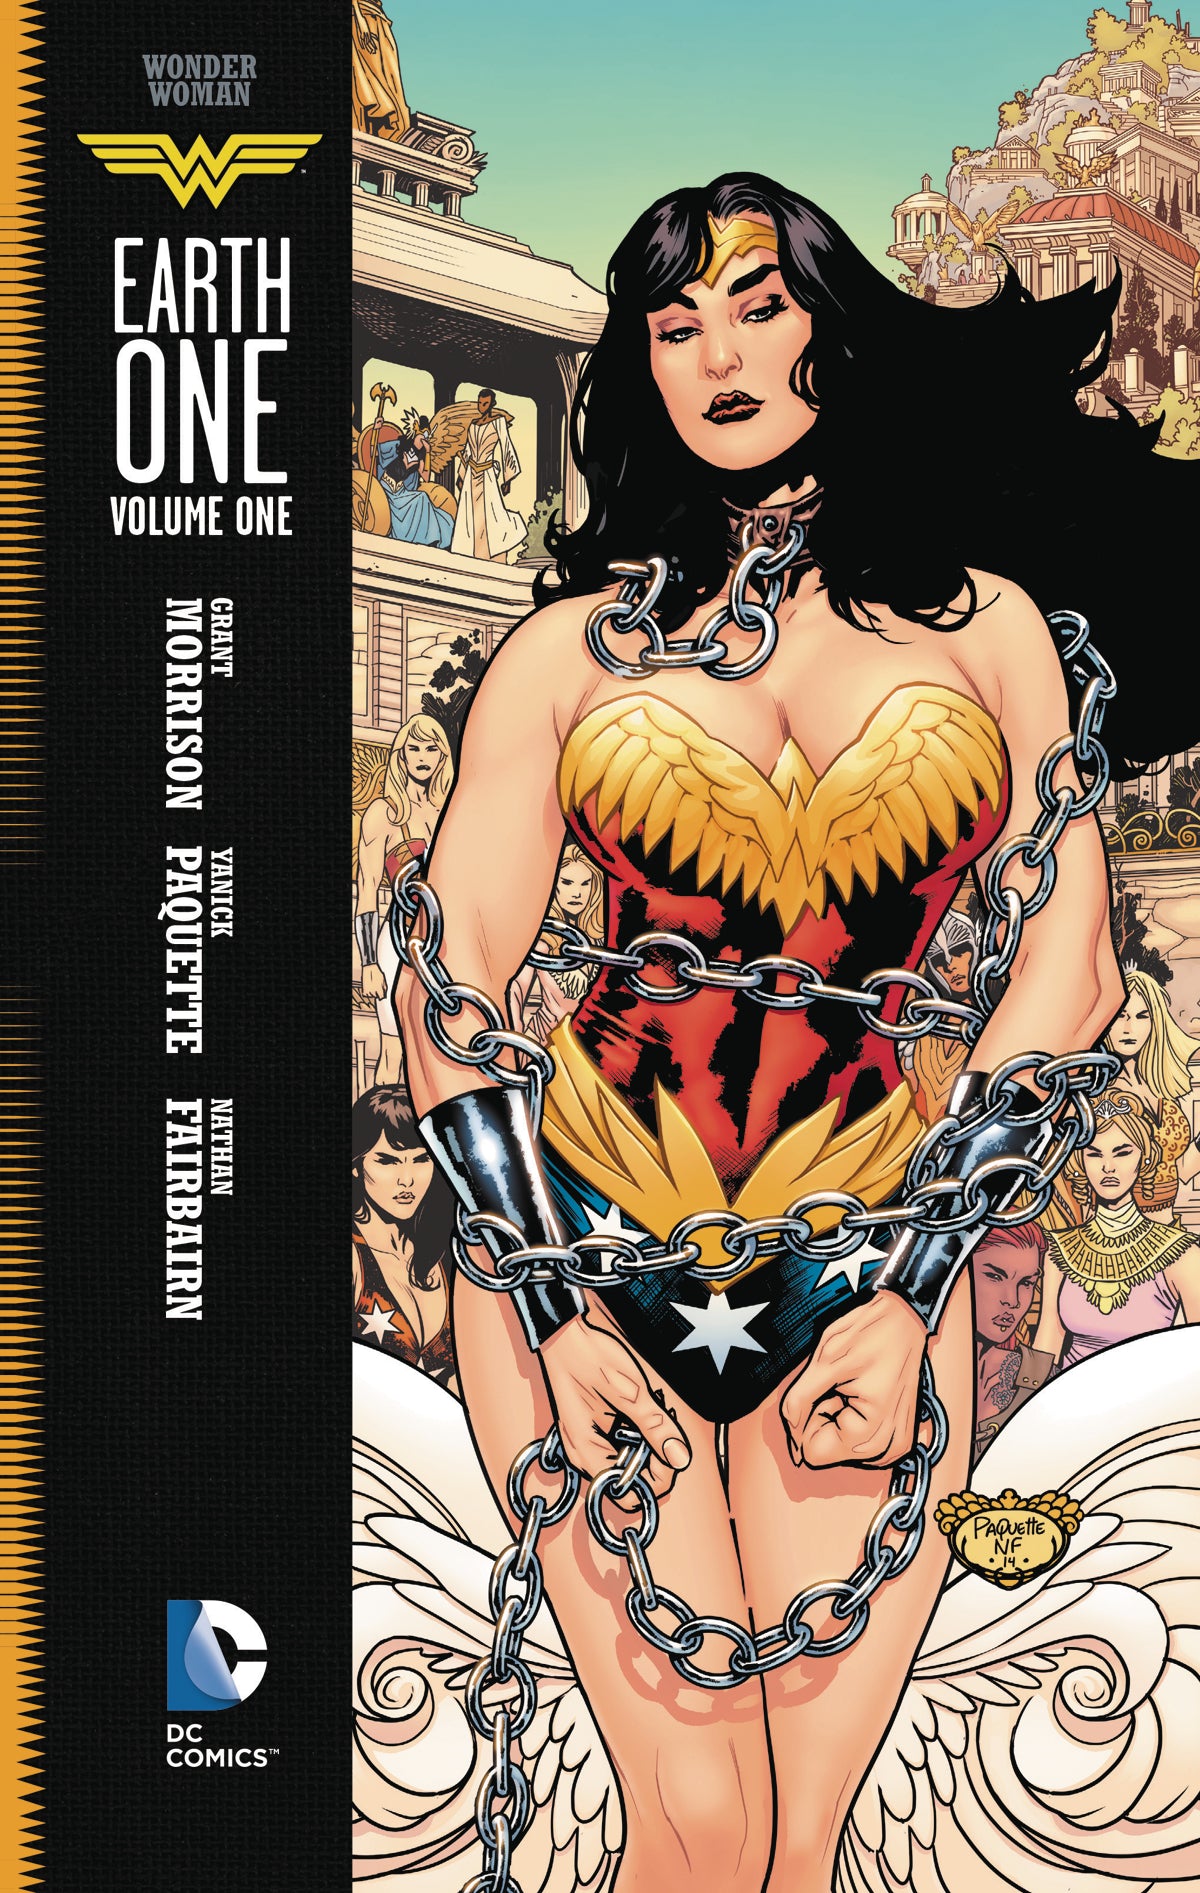 WONDER WOMAN EARTH ONE TP VOL 01 | Game Master's Emporium (The New GME)